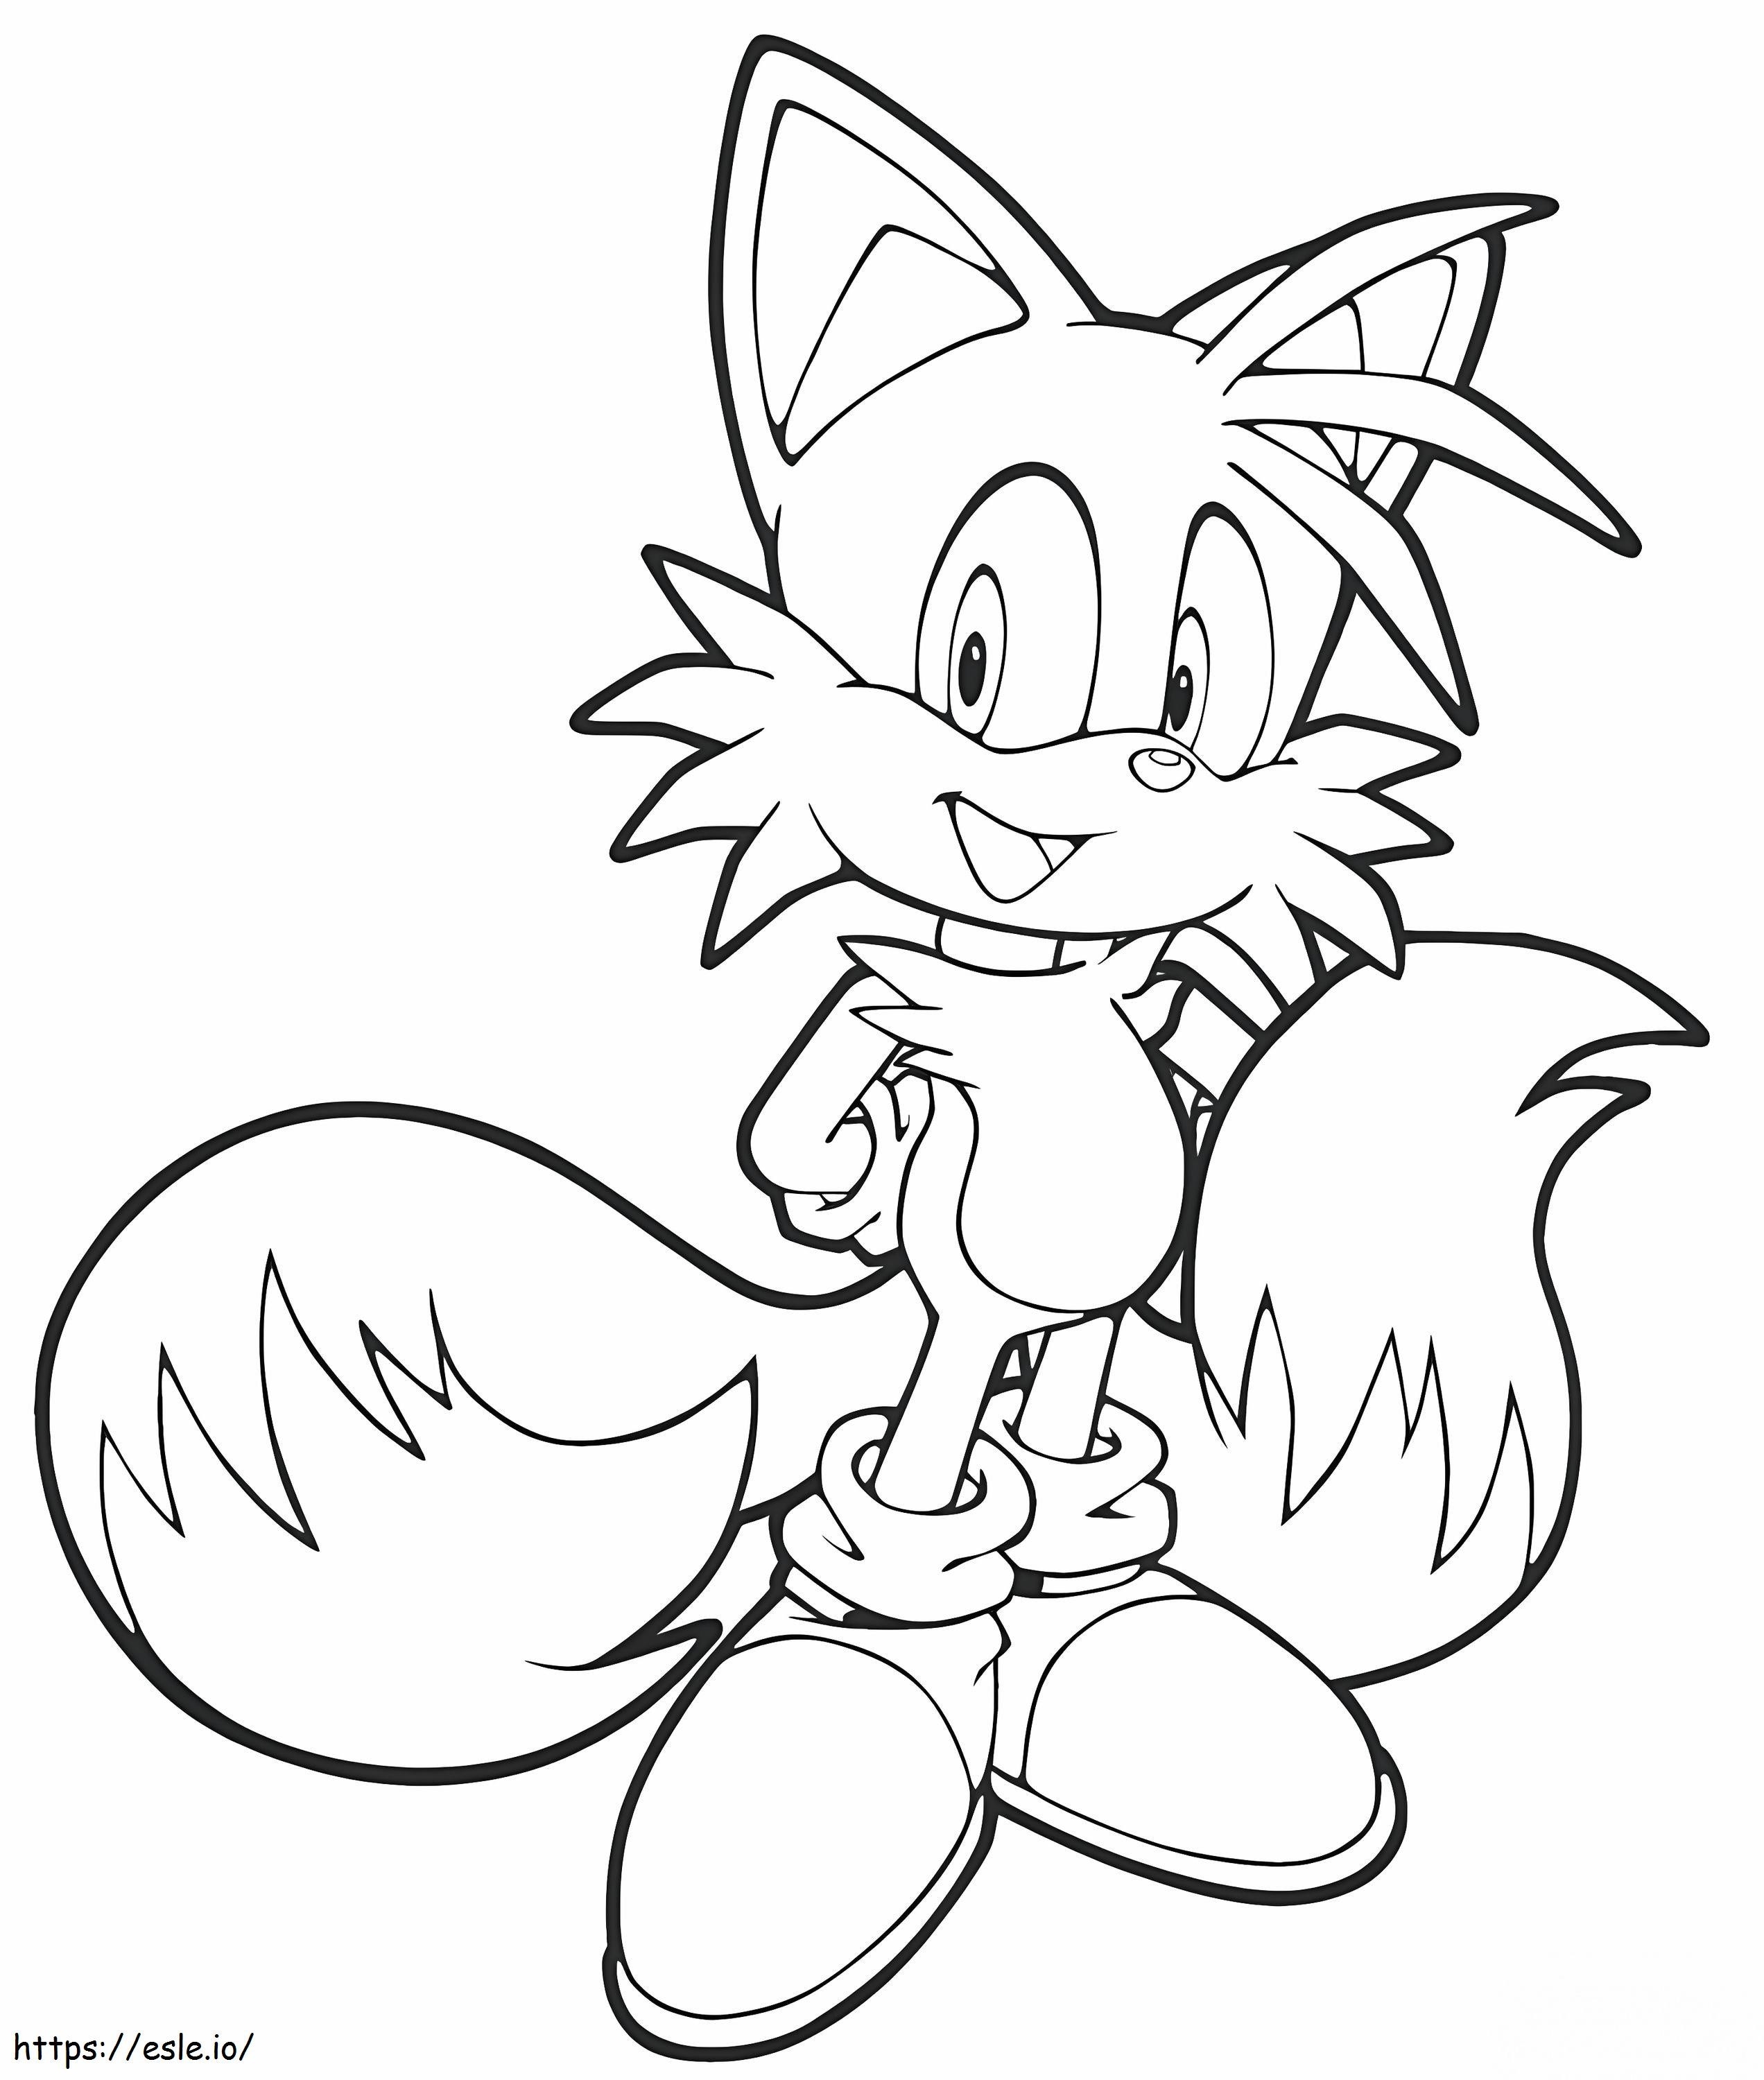 Sonic tails coloring page